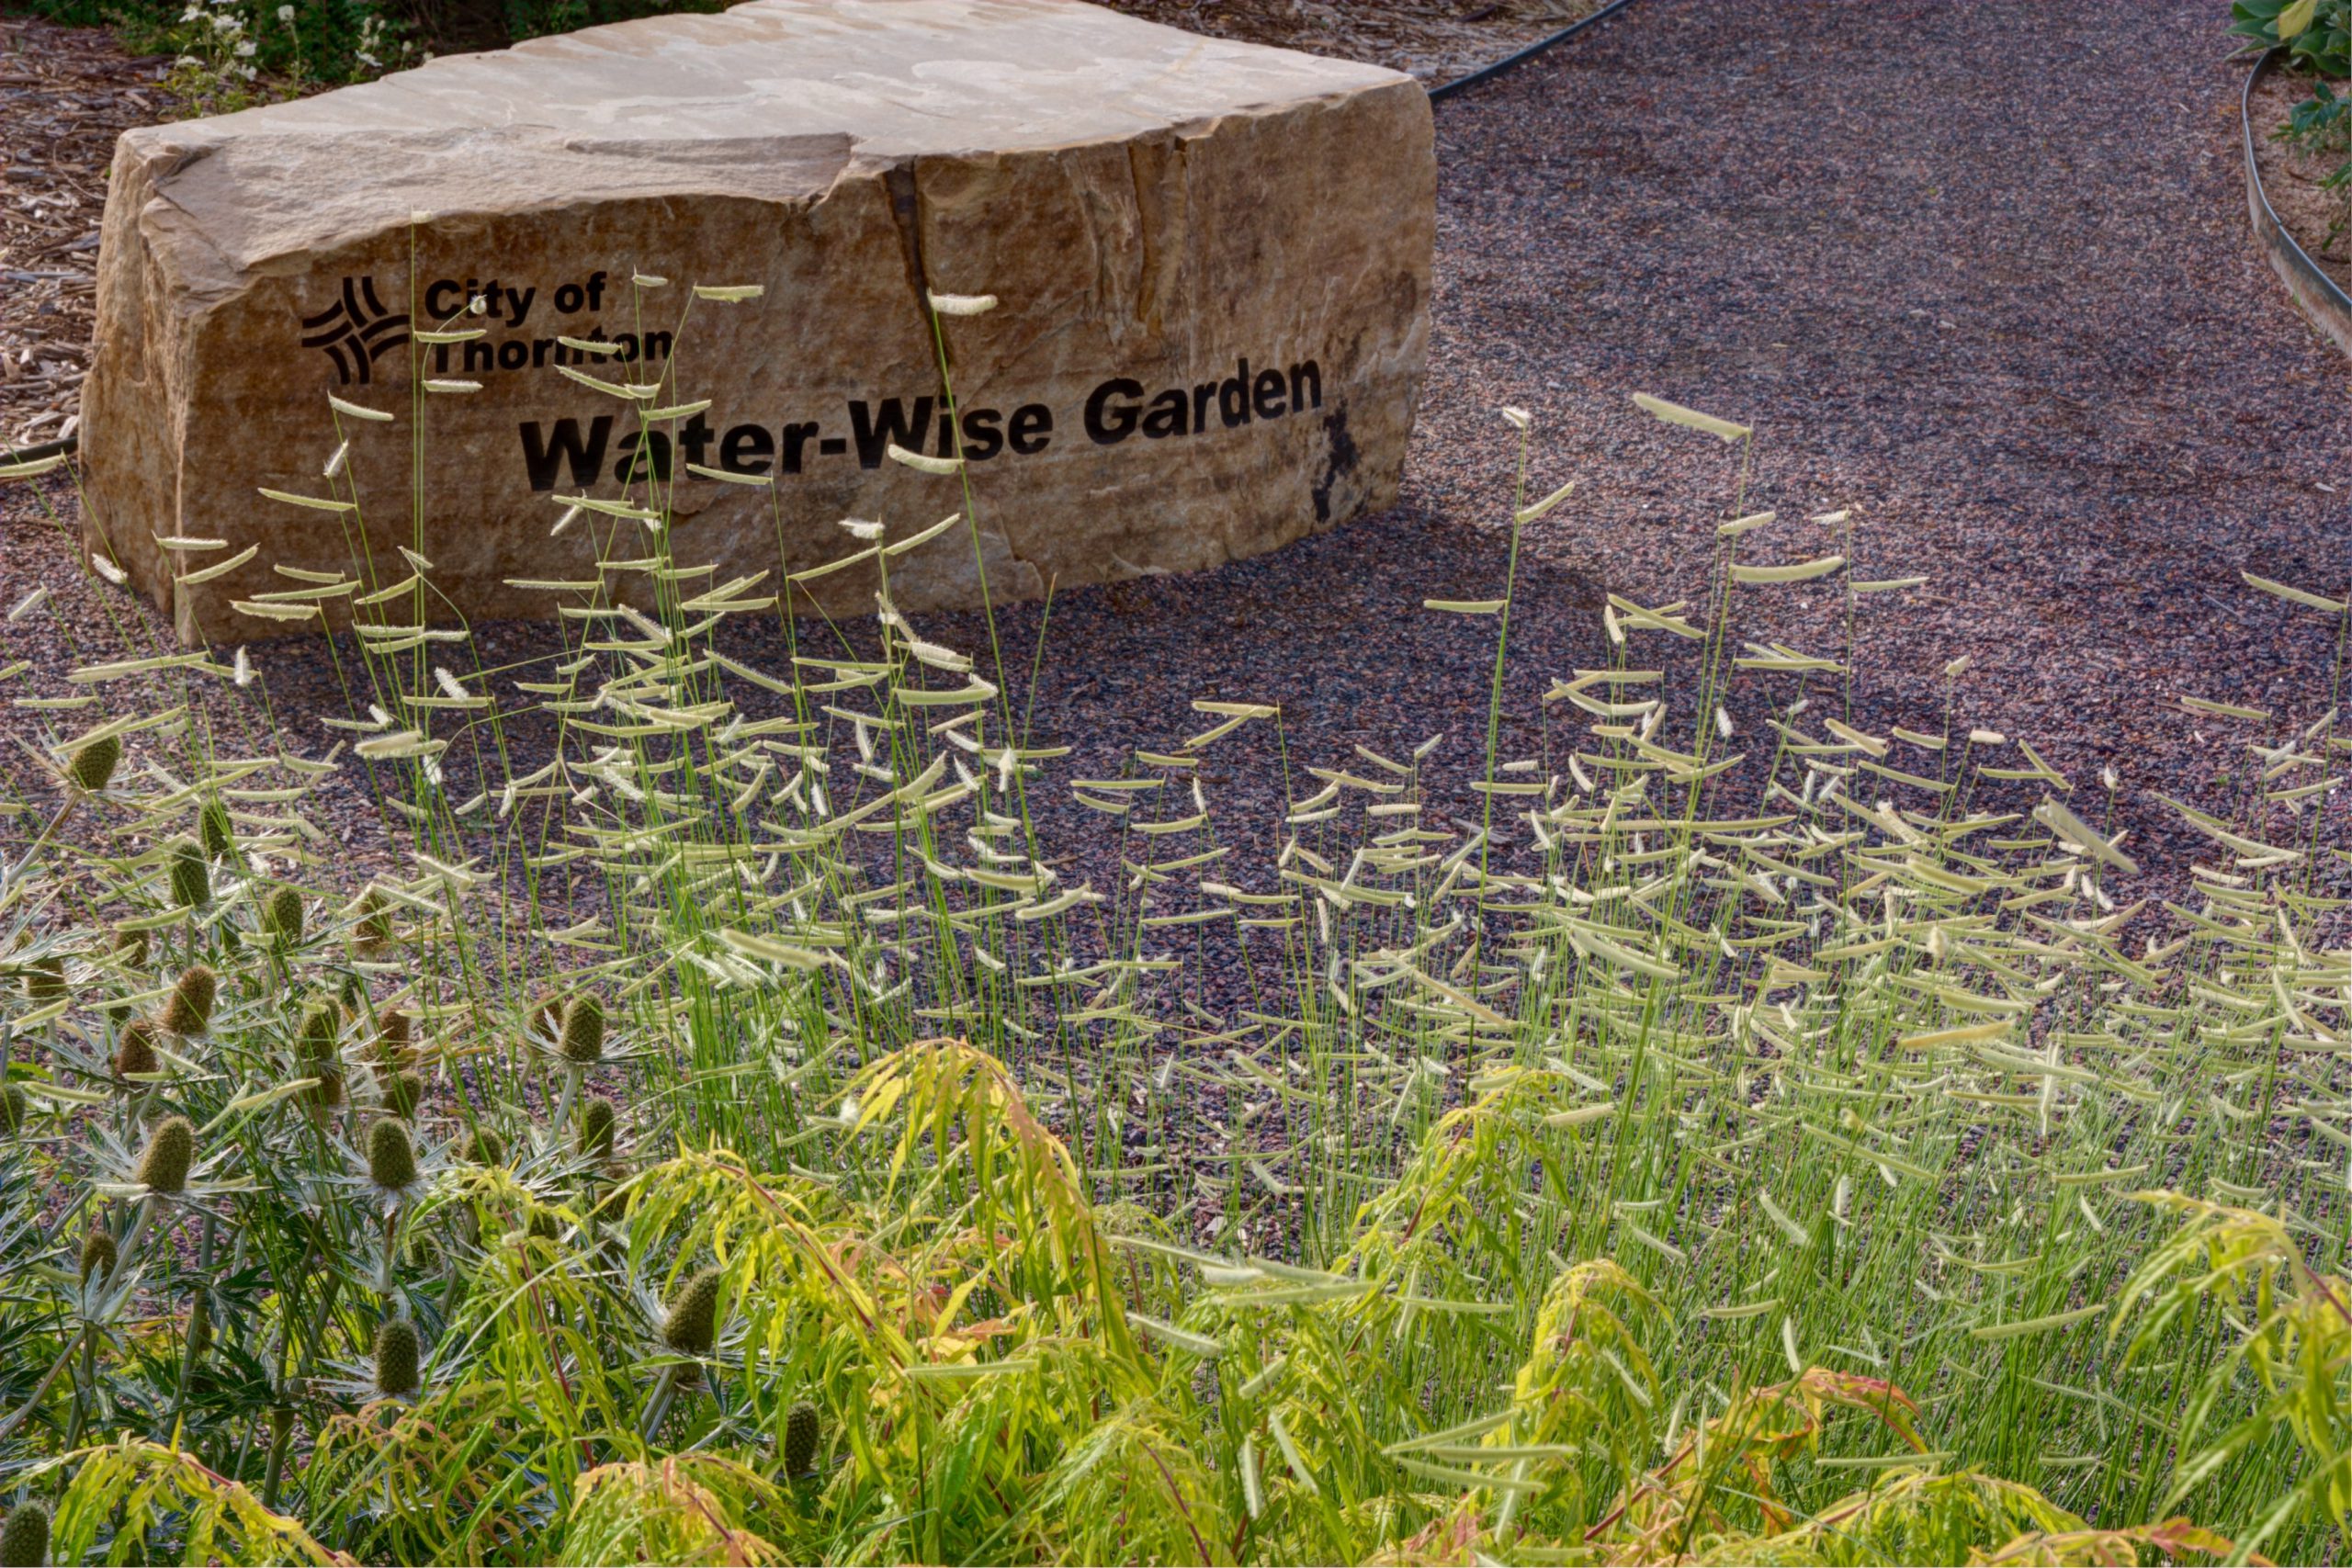 A tan stone bench labeled City of Thornton, Water-Wise garden sits in crushed gravel surrounded by natural grasses and shrubs.